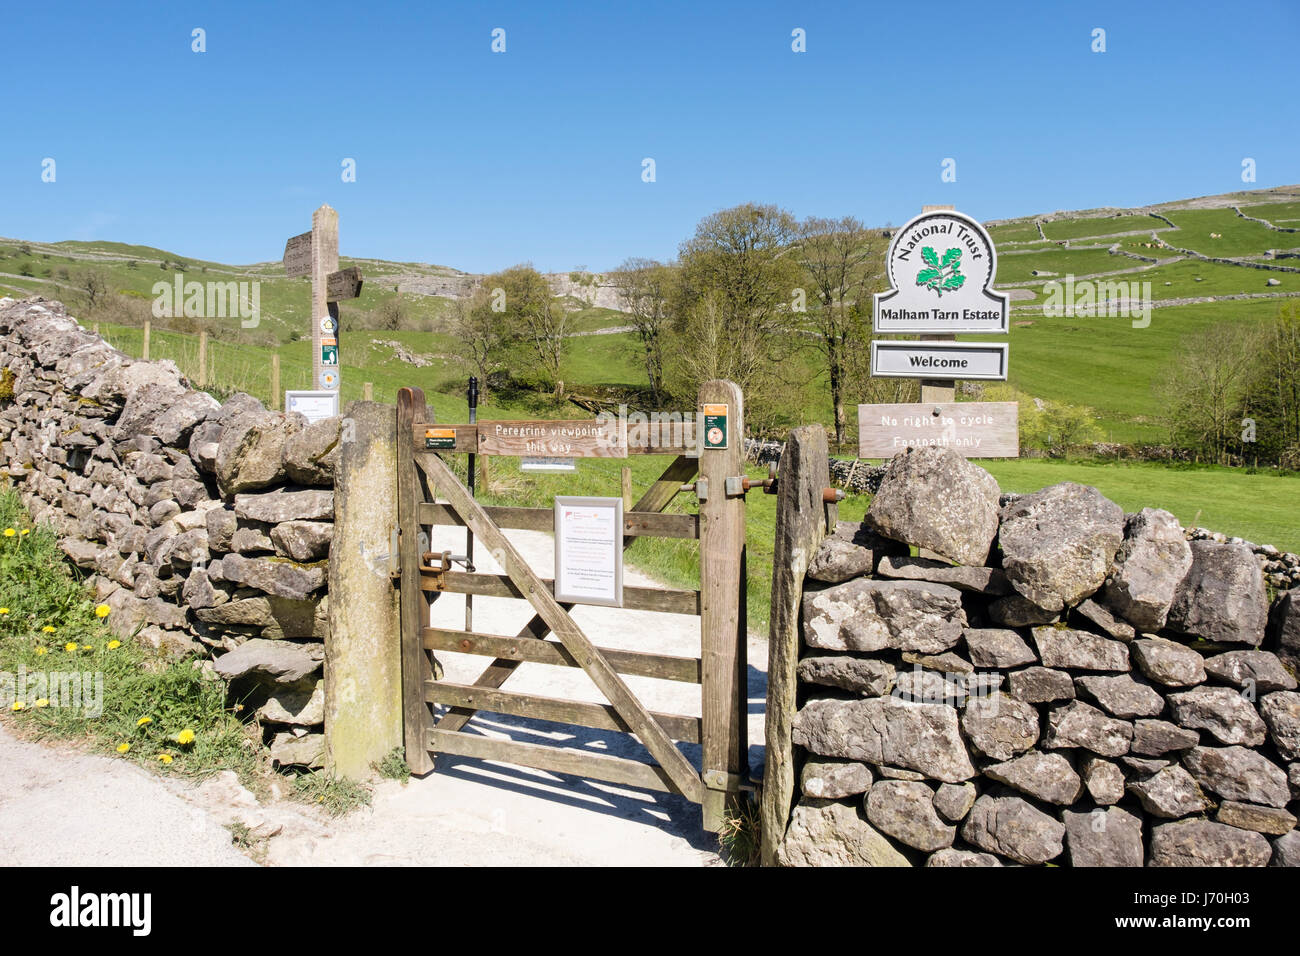 Gate and footpath access to Peregrine viewpoint at Malham Cove following Pennine Way. Malham Yorkshire Dales National Park Yorkshire England UK Stock Photo